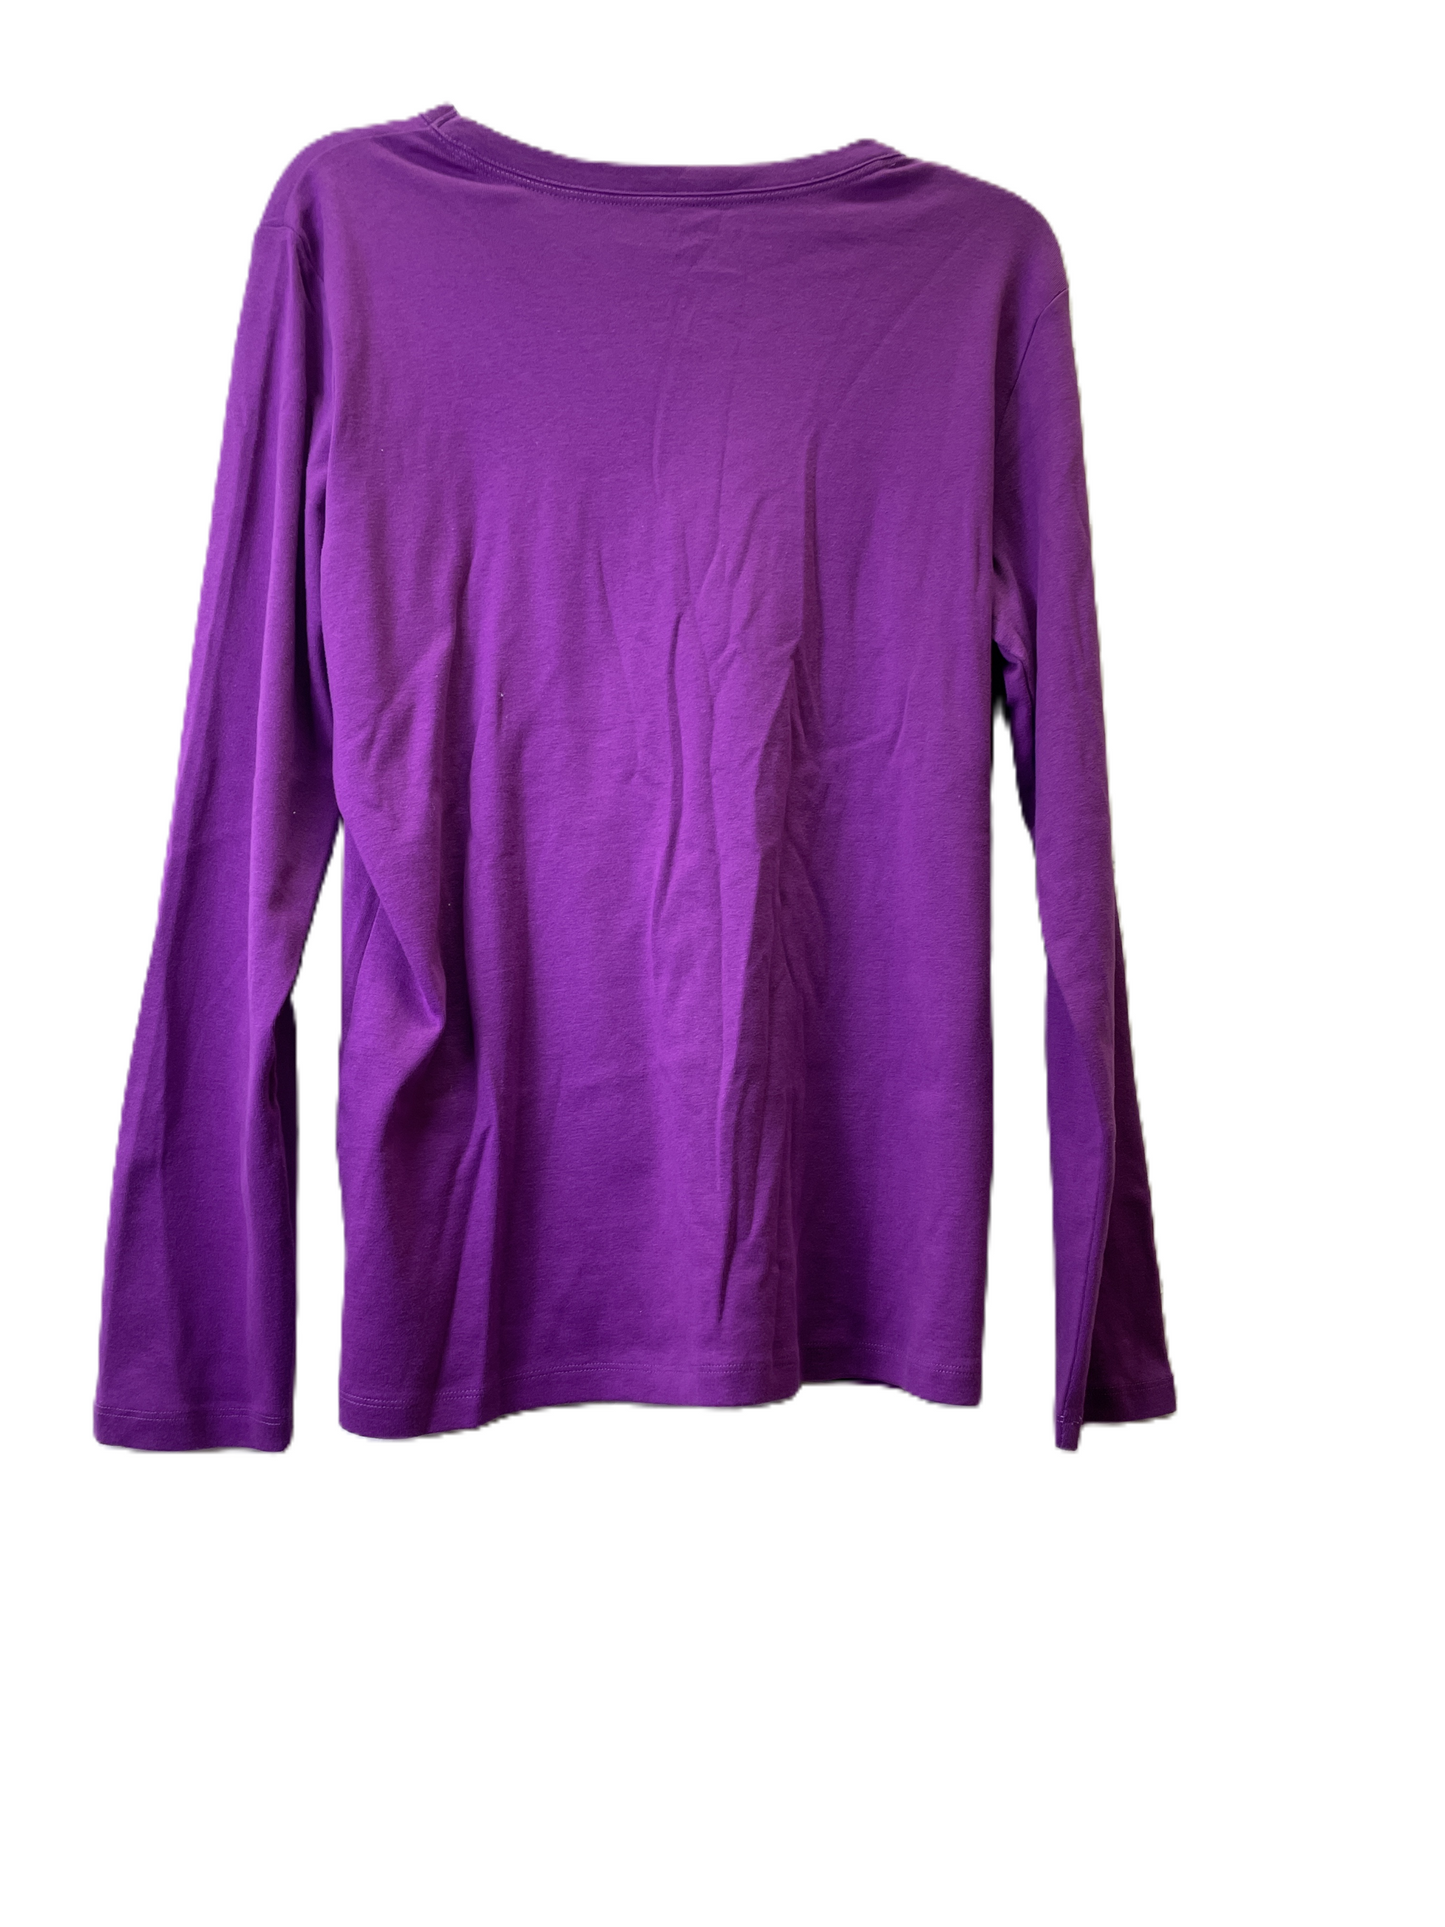 Purple Top Long Sleeve By Lands End, Size: Xl